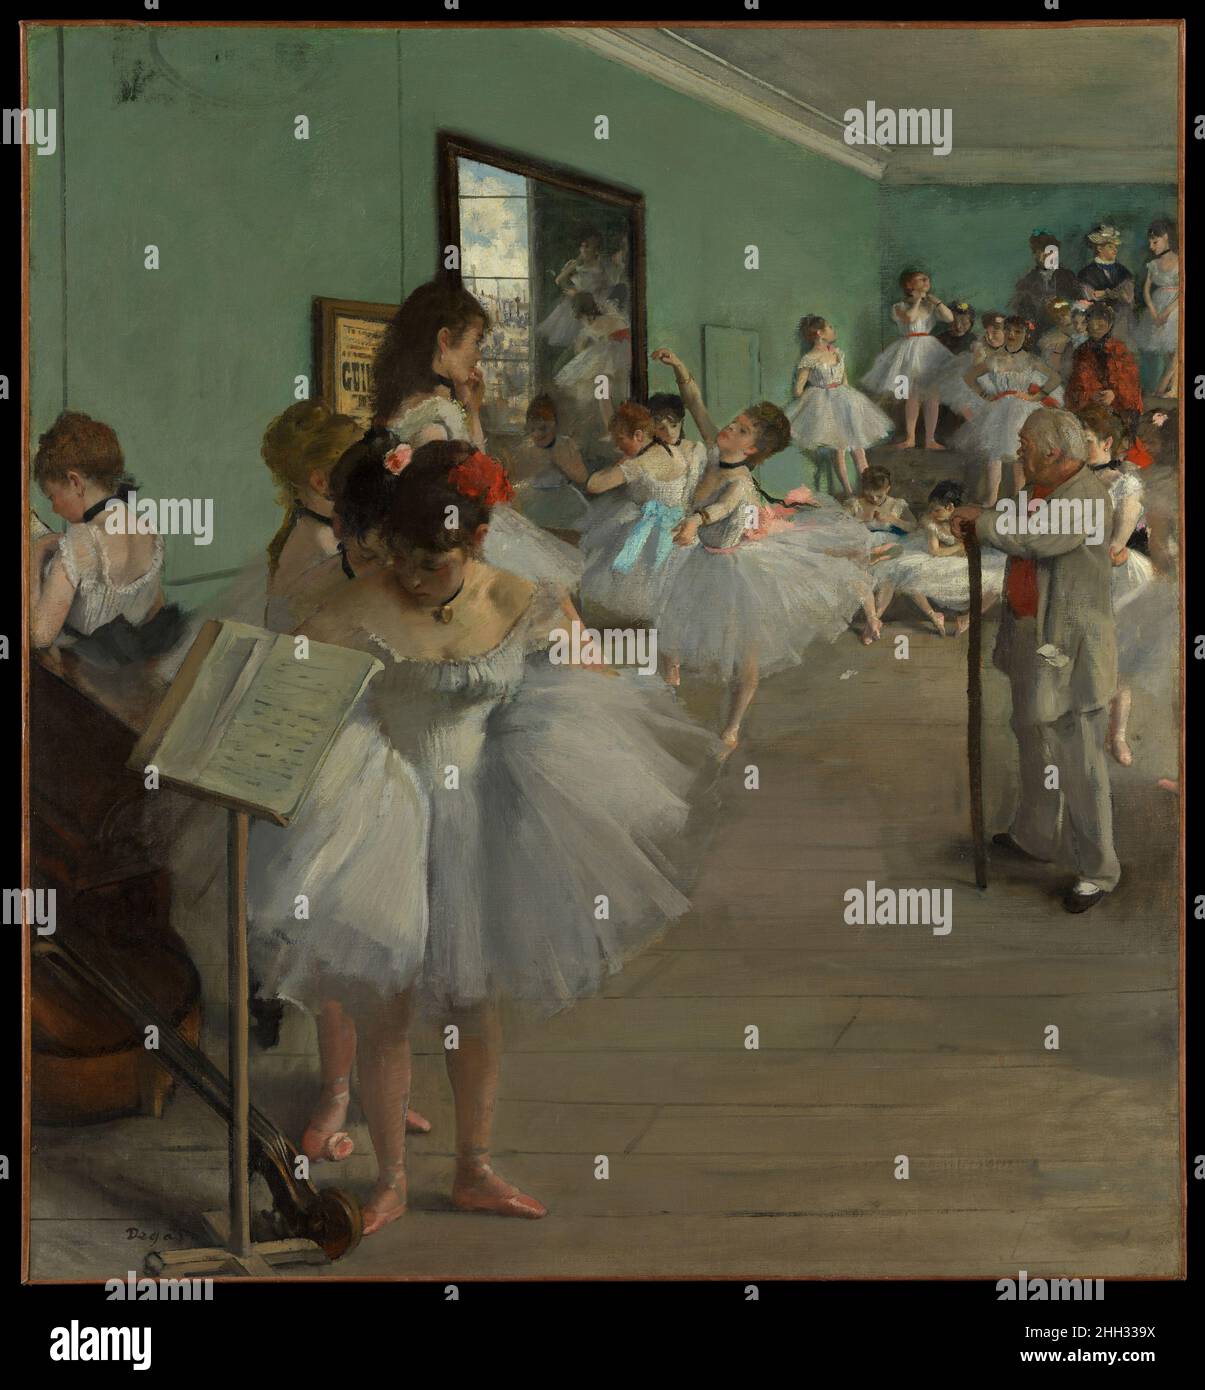 The Dance Class 1874 Edgar Degas French This work and its variant in the Musée d'Orsay, Paris, represent the most ambitious paintings Degas devoted to the theme of the dance. Some twenty-four women, ballerinas and their mothers, wait while a dancer executes an 'attitude' for her examination. Jules Perrot, a famous ballet master, conducts the class. The imaginary scene is set in a rehearsal room in the old Paris Opéra, which had recently burned to the ground. On the wall beside the mirror, a poster for Rossini’s Guillaume Tell pays tribute to the singer Jean-Baptiste Faure, who commissioned the Stock Photo